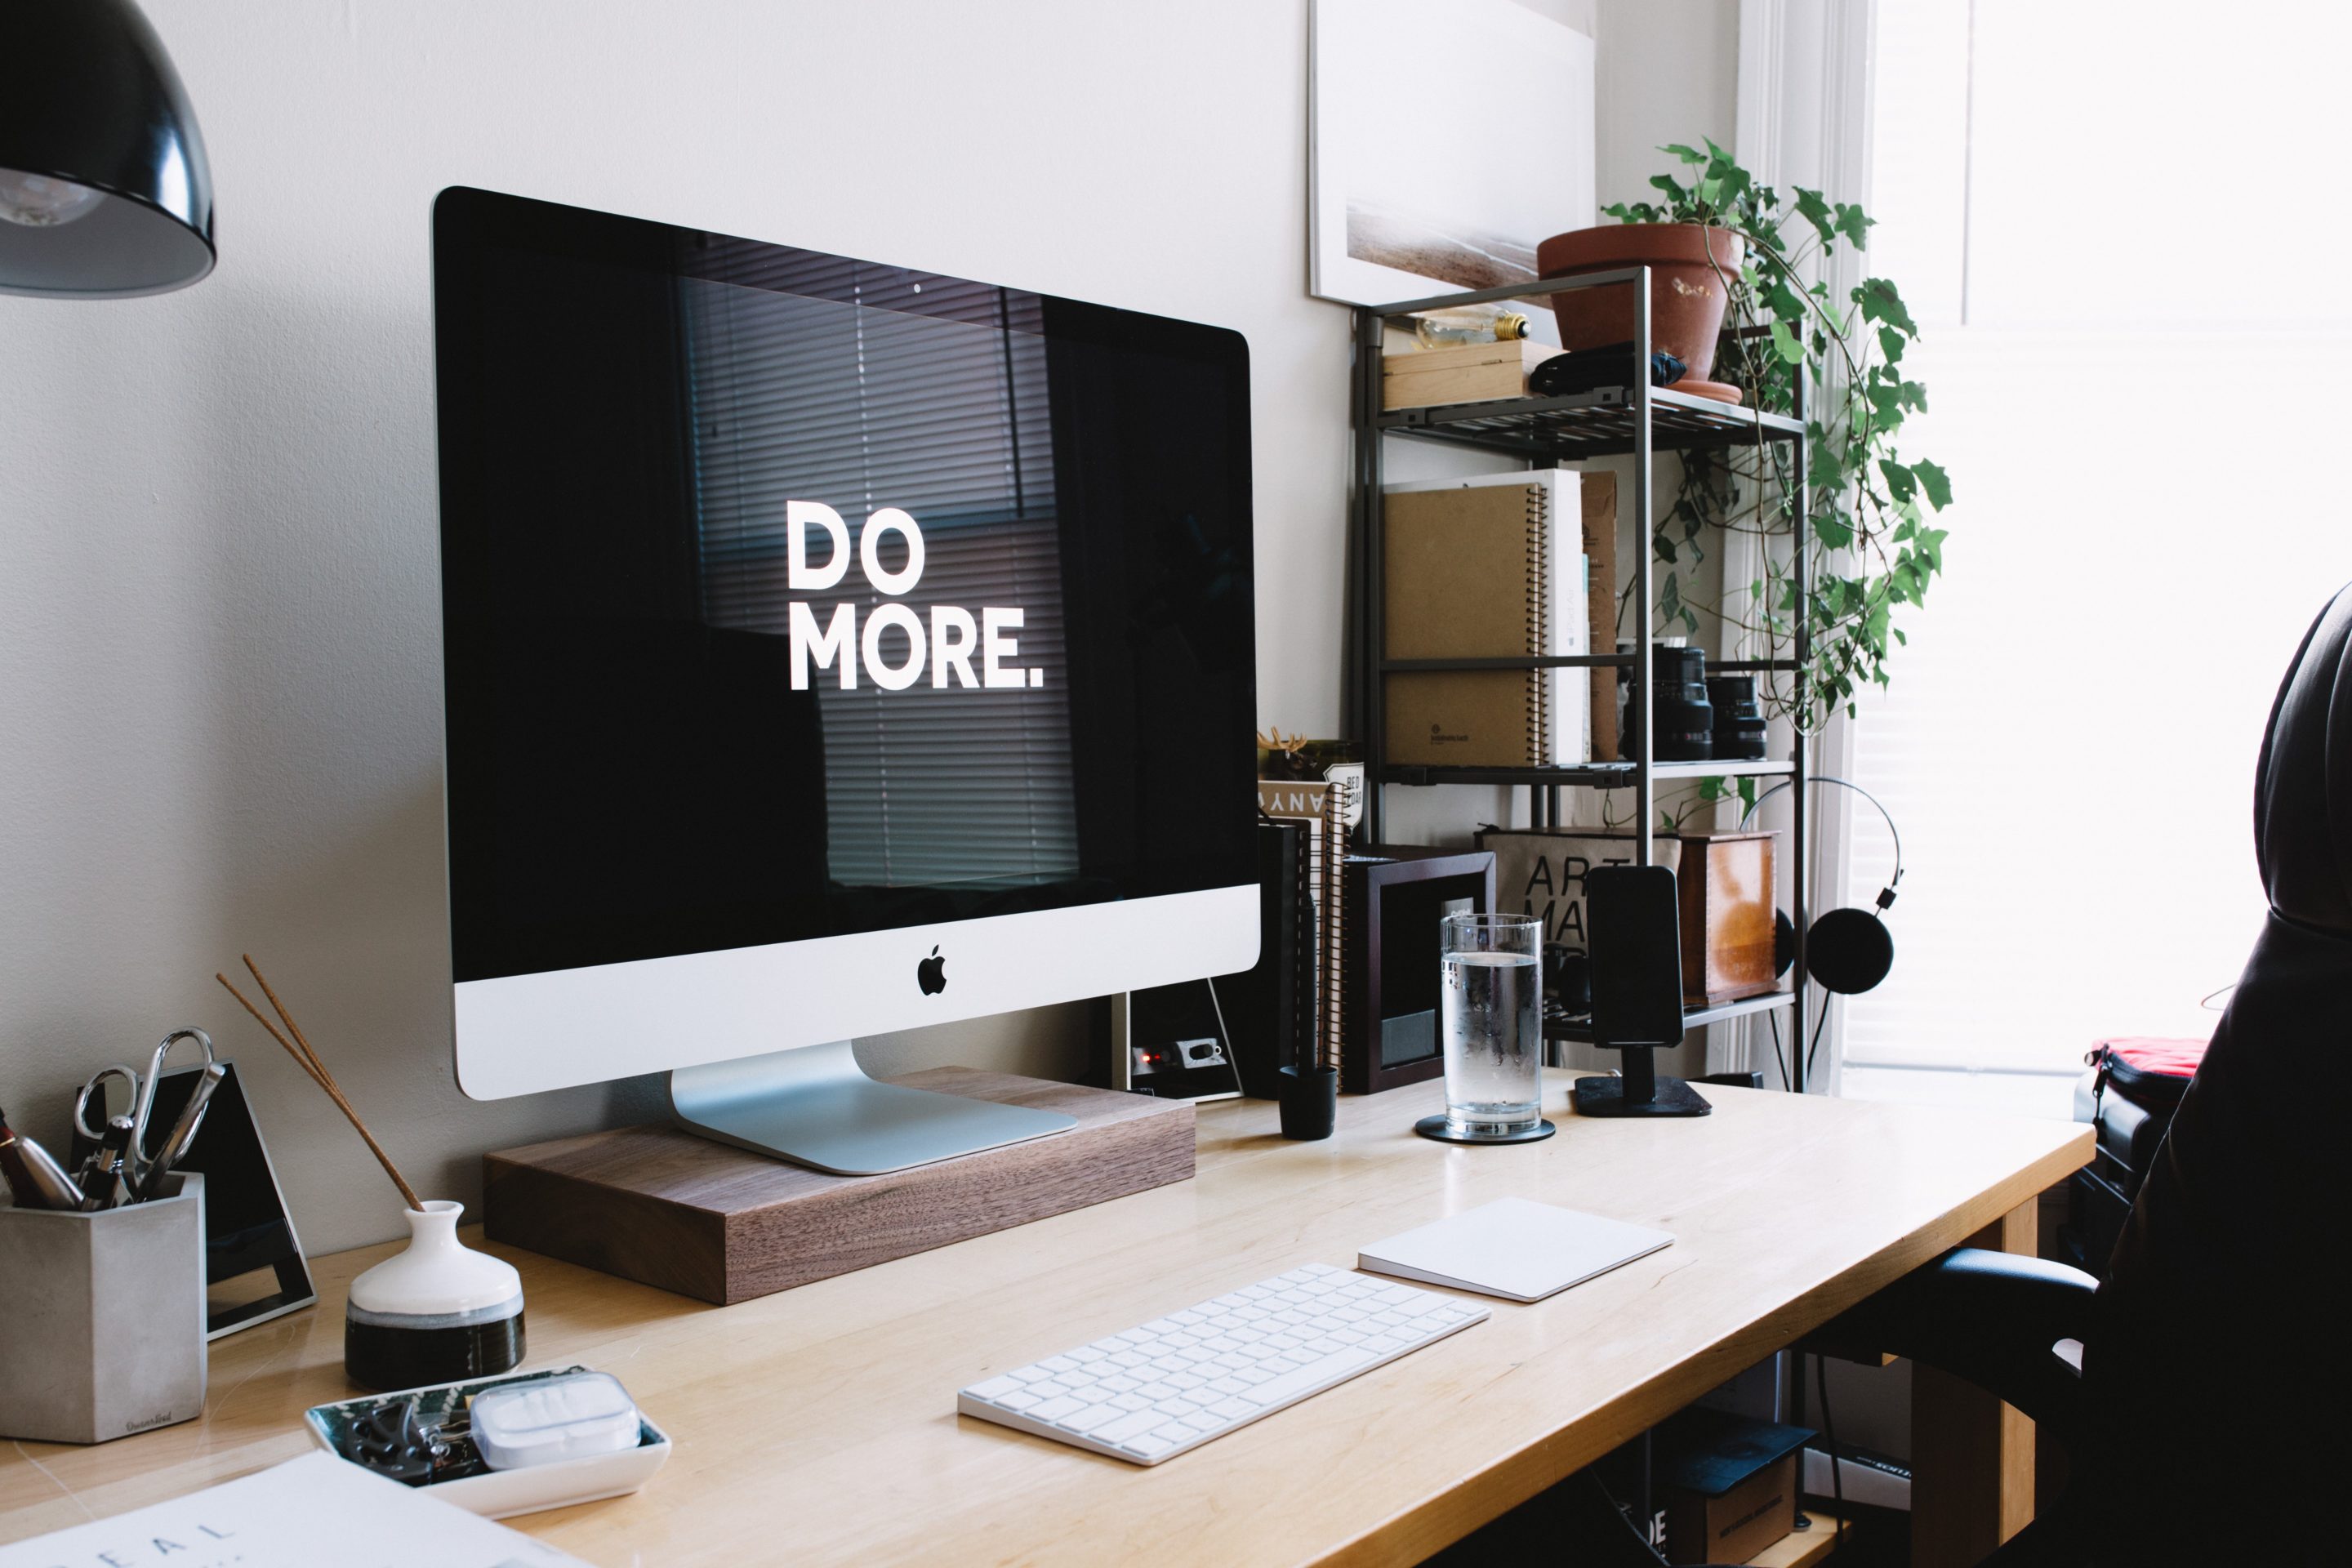 Home office desk with a Macbook computer on top that display the text "do more" in white with a black background